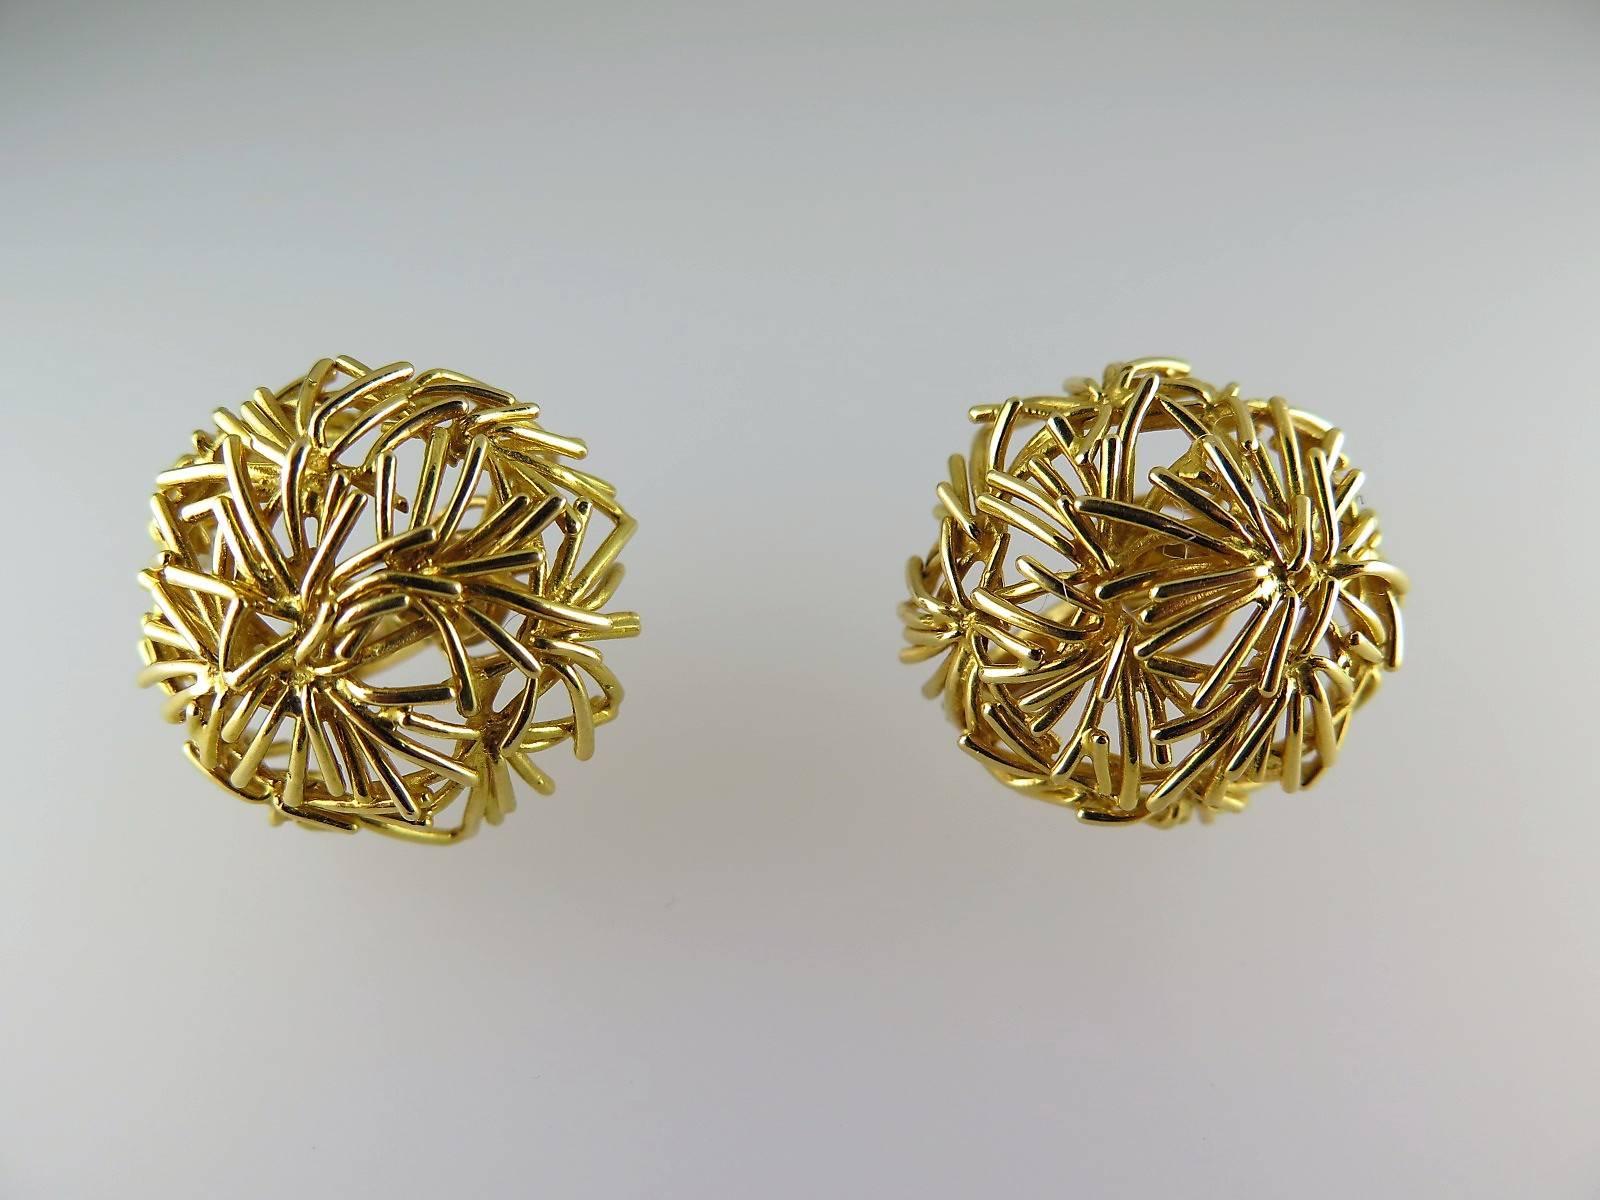 Each gold pierced bombé earclip of inverted bird's nest design signed by Boucheron Paris, numbered, French assay marks